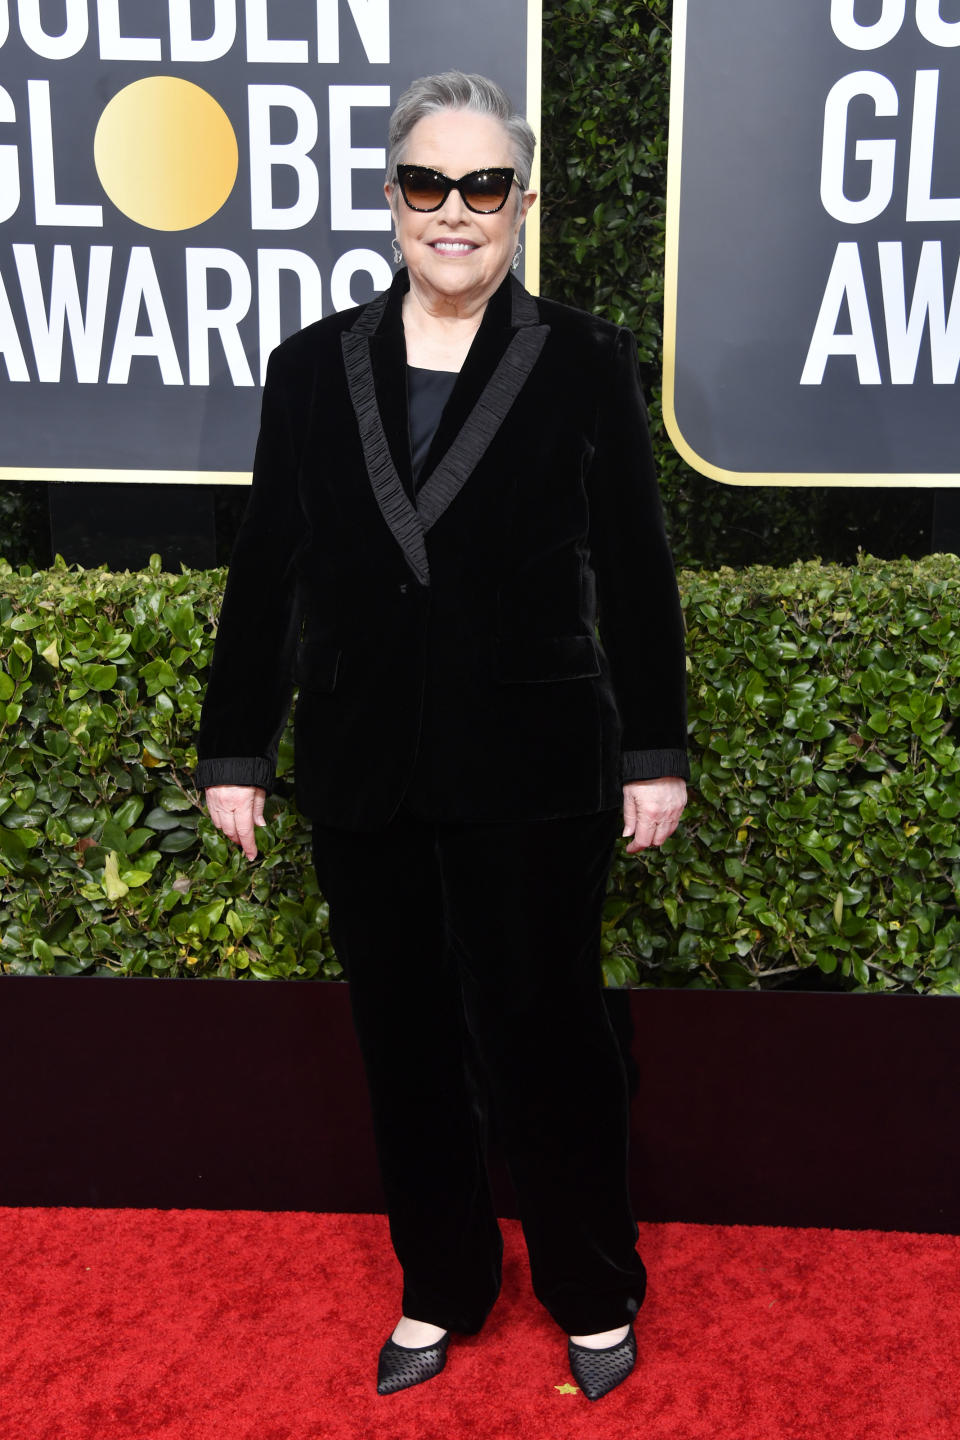 BEVERLY HILLS, CALIFORNIA - JANUARY 05: Kathy Bates attends the 77th Annual Golden Globe Awards at The Beverly Hilton Hotel on January 05, 2020 in Beverly Hills, California. (Photo by Frazer Harrison/Getty Images)